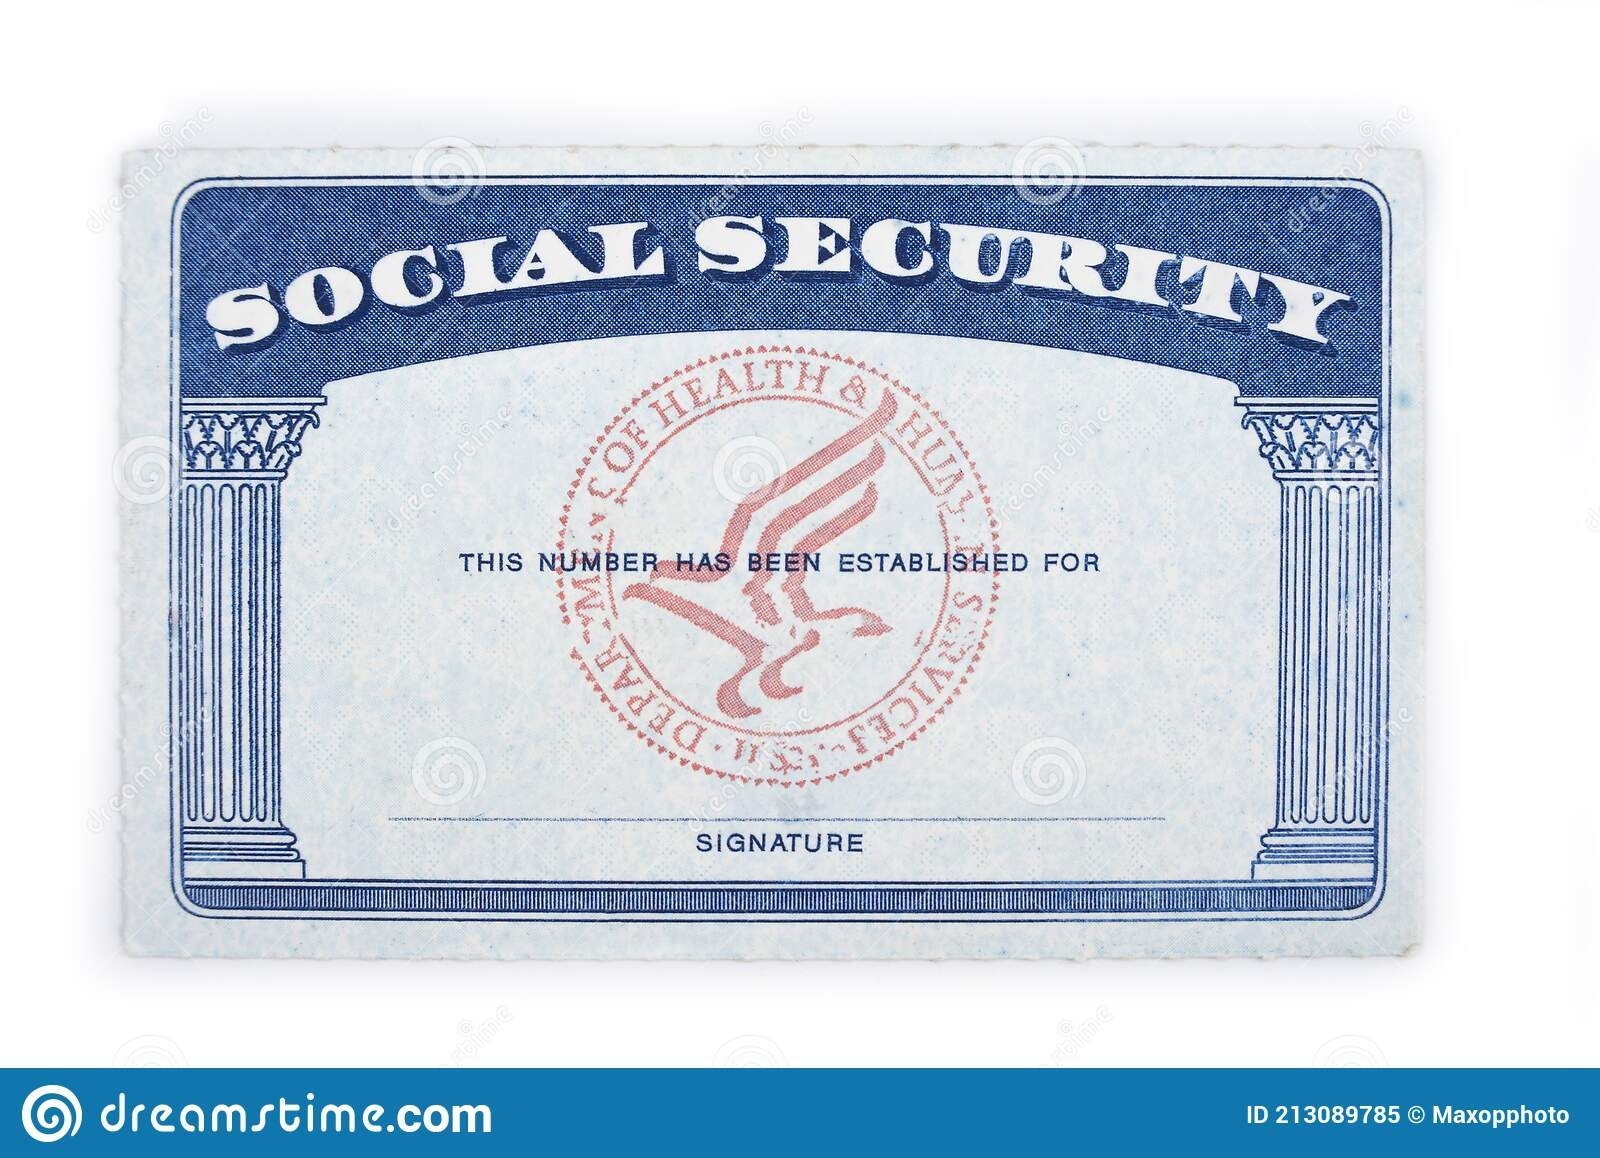 Social Security Card Template Pdf Throughout Social Security Card Template Pdf